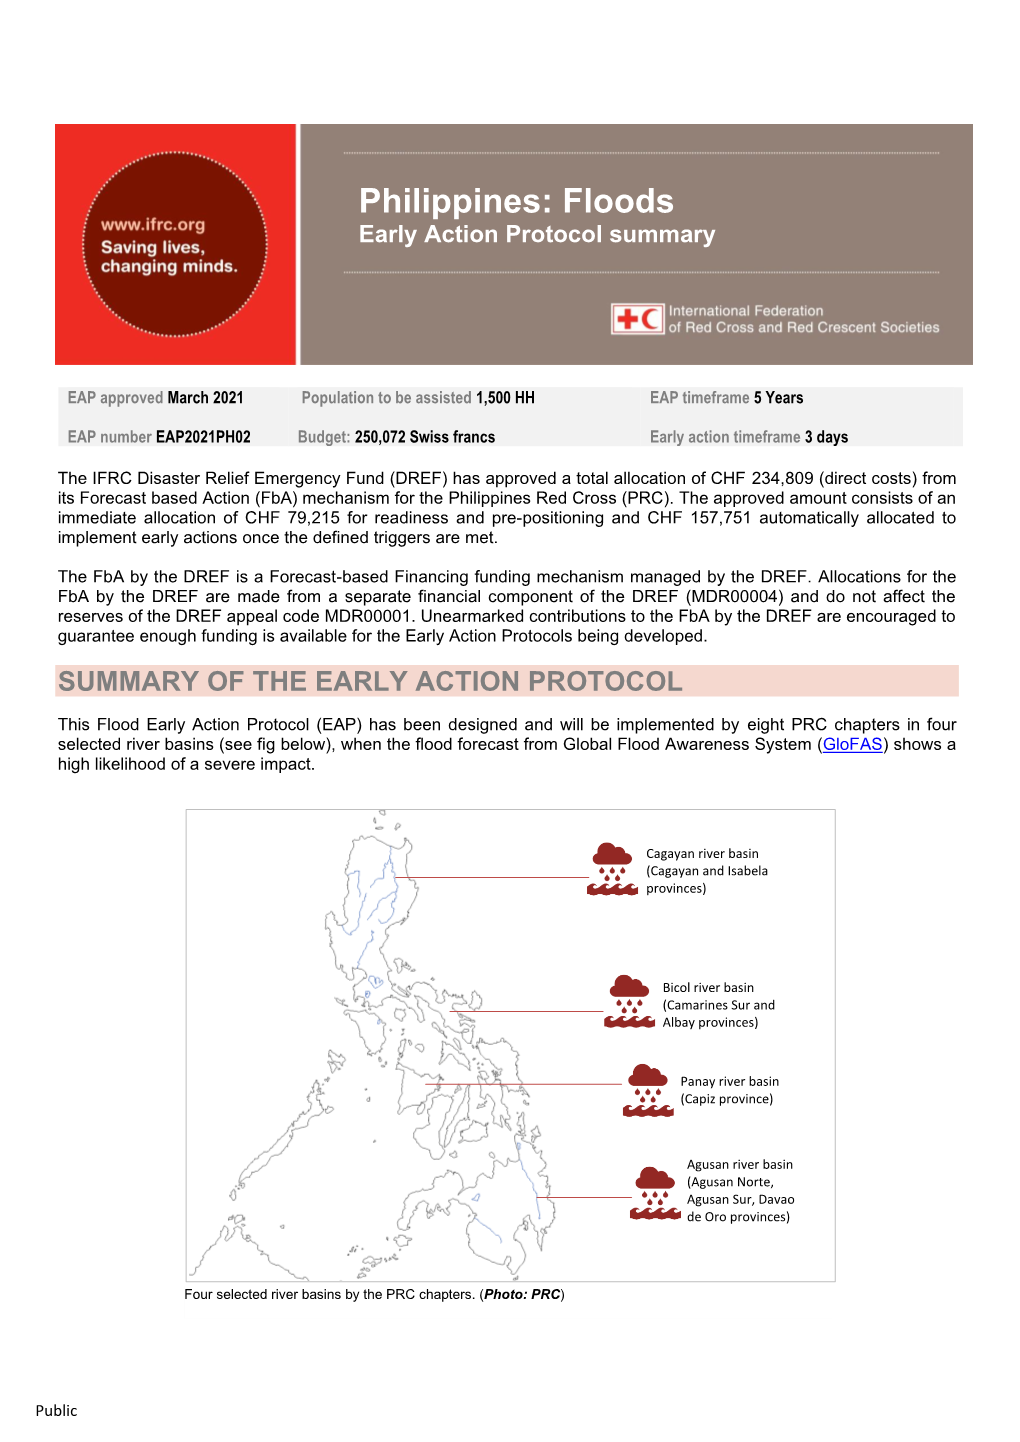 Philippines: Floods Early Action Protocol Summary